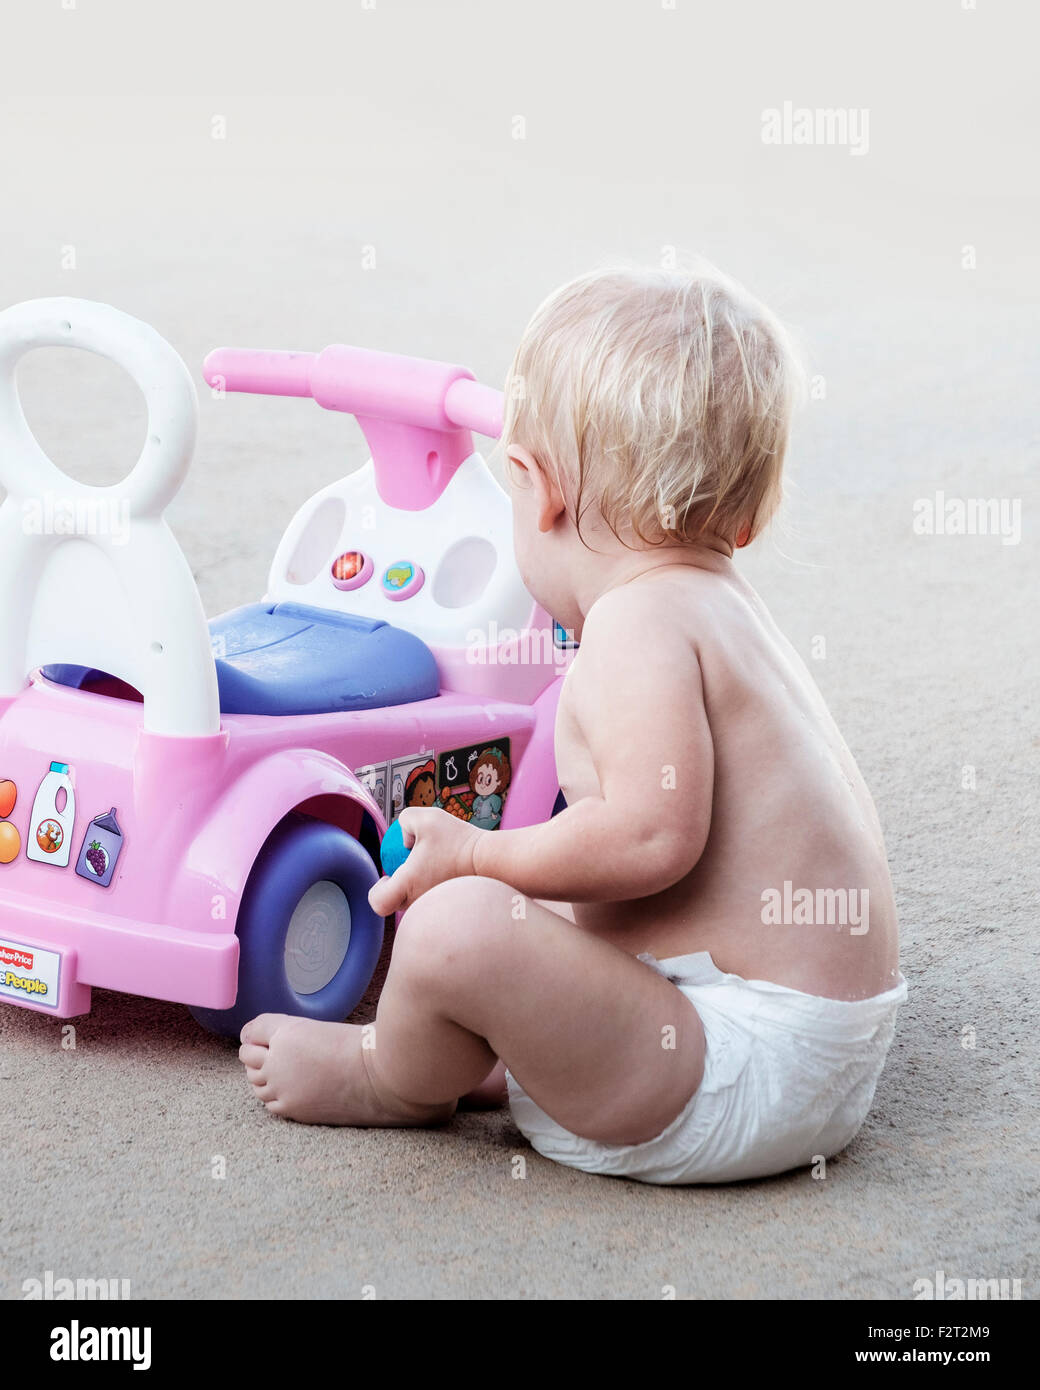 A one year old blonde Caucasian baby girl in a diaper only plays with her riding toy car. Stock Photo